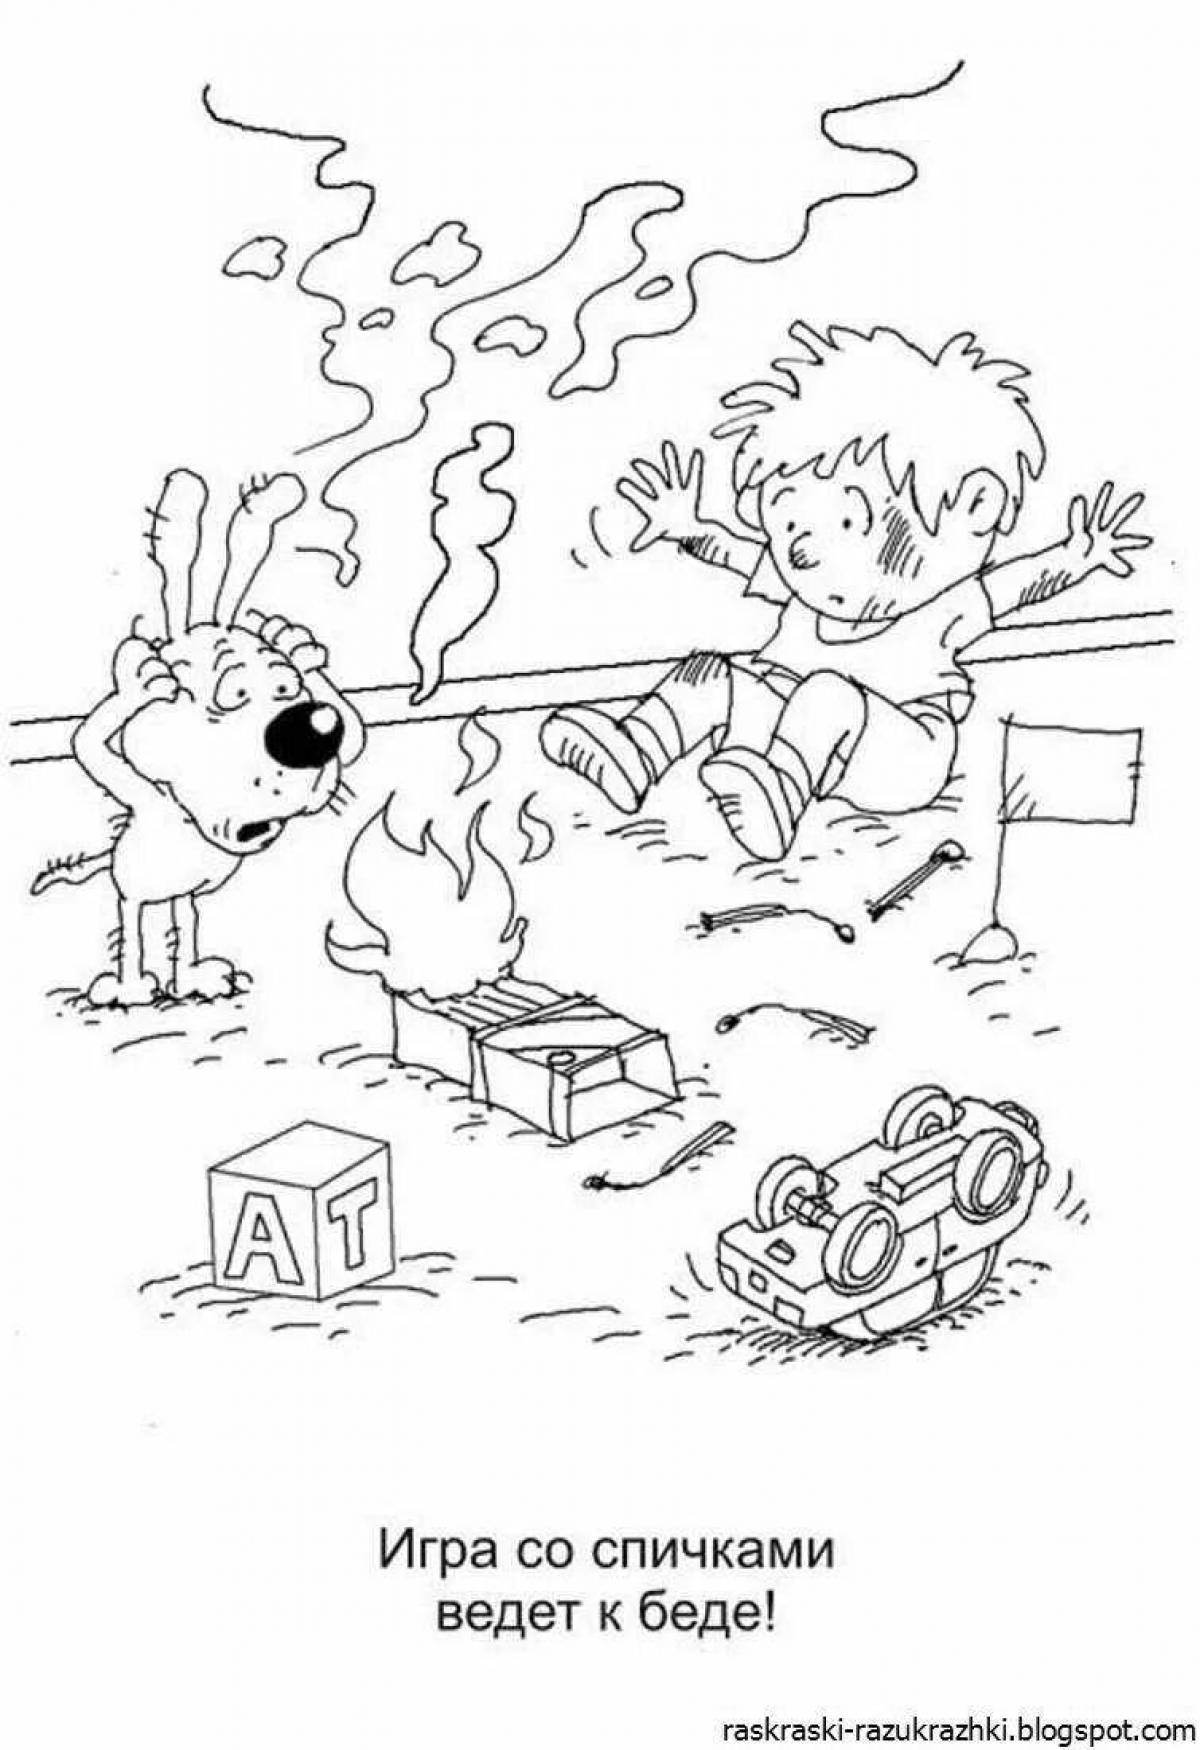 Creative Safety Rules Coloring Page